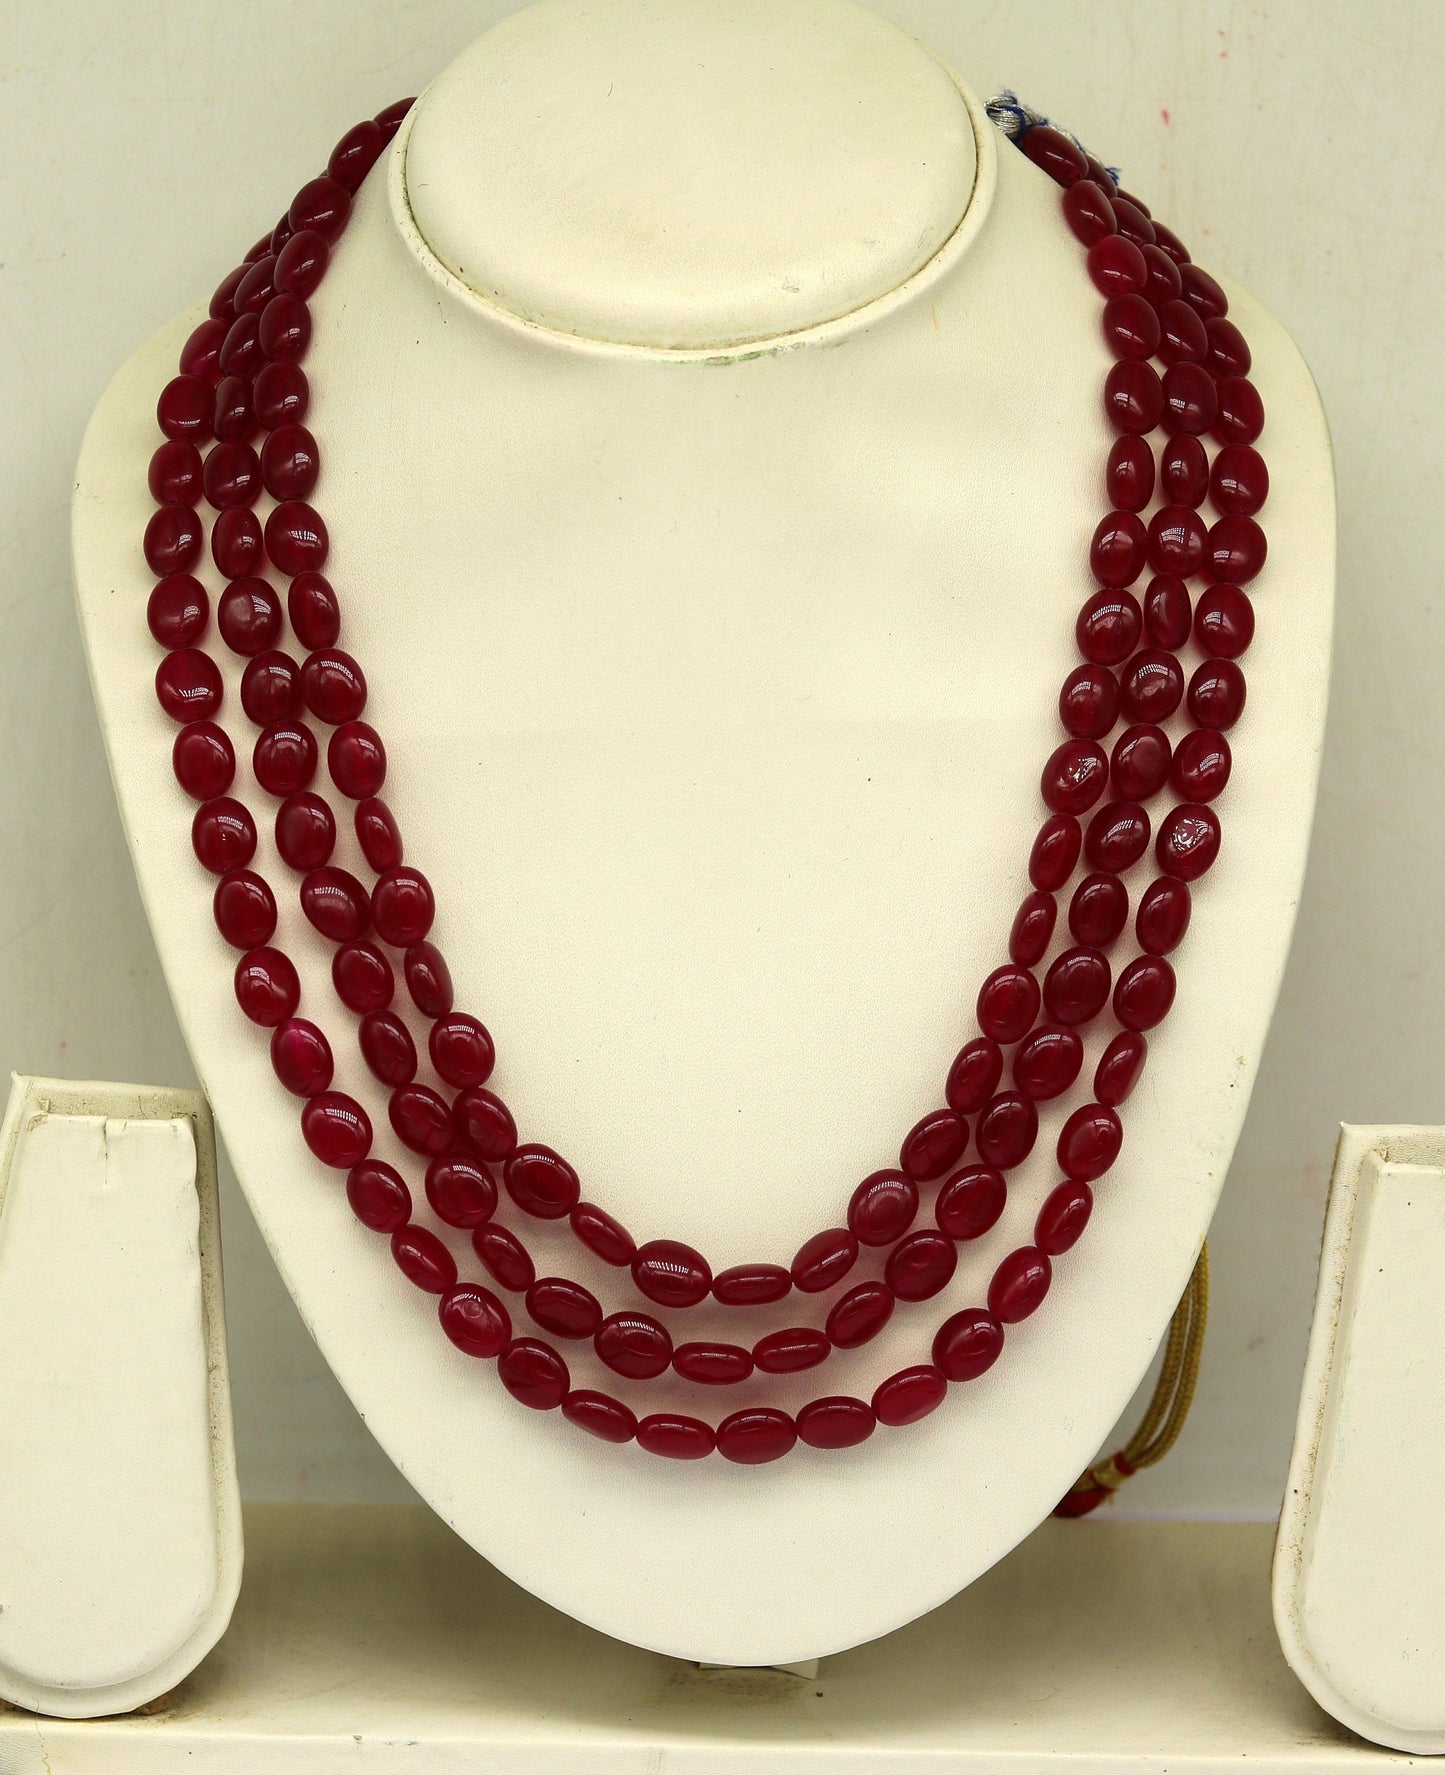 Amazing 3 strands oval Red jade gemstone penalized necklace, gorgeous customized wedding anniversary bridal necklace charm jewelry set126 - TRIBAL ORNAMENTS